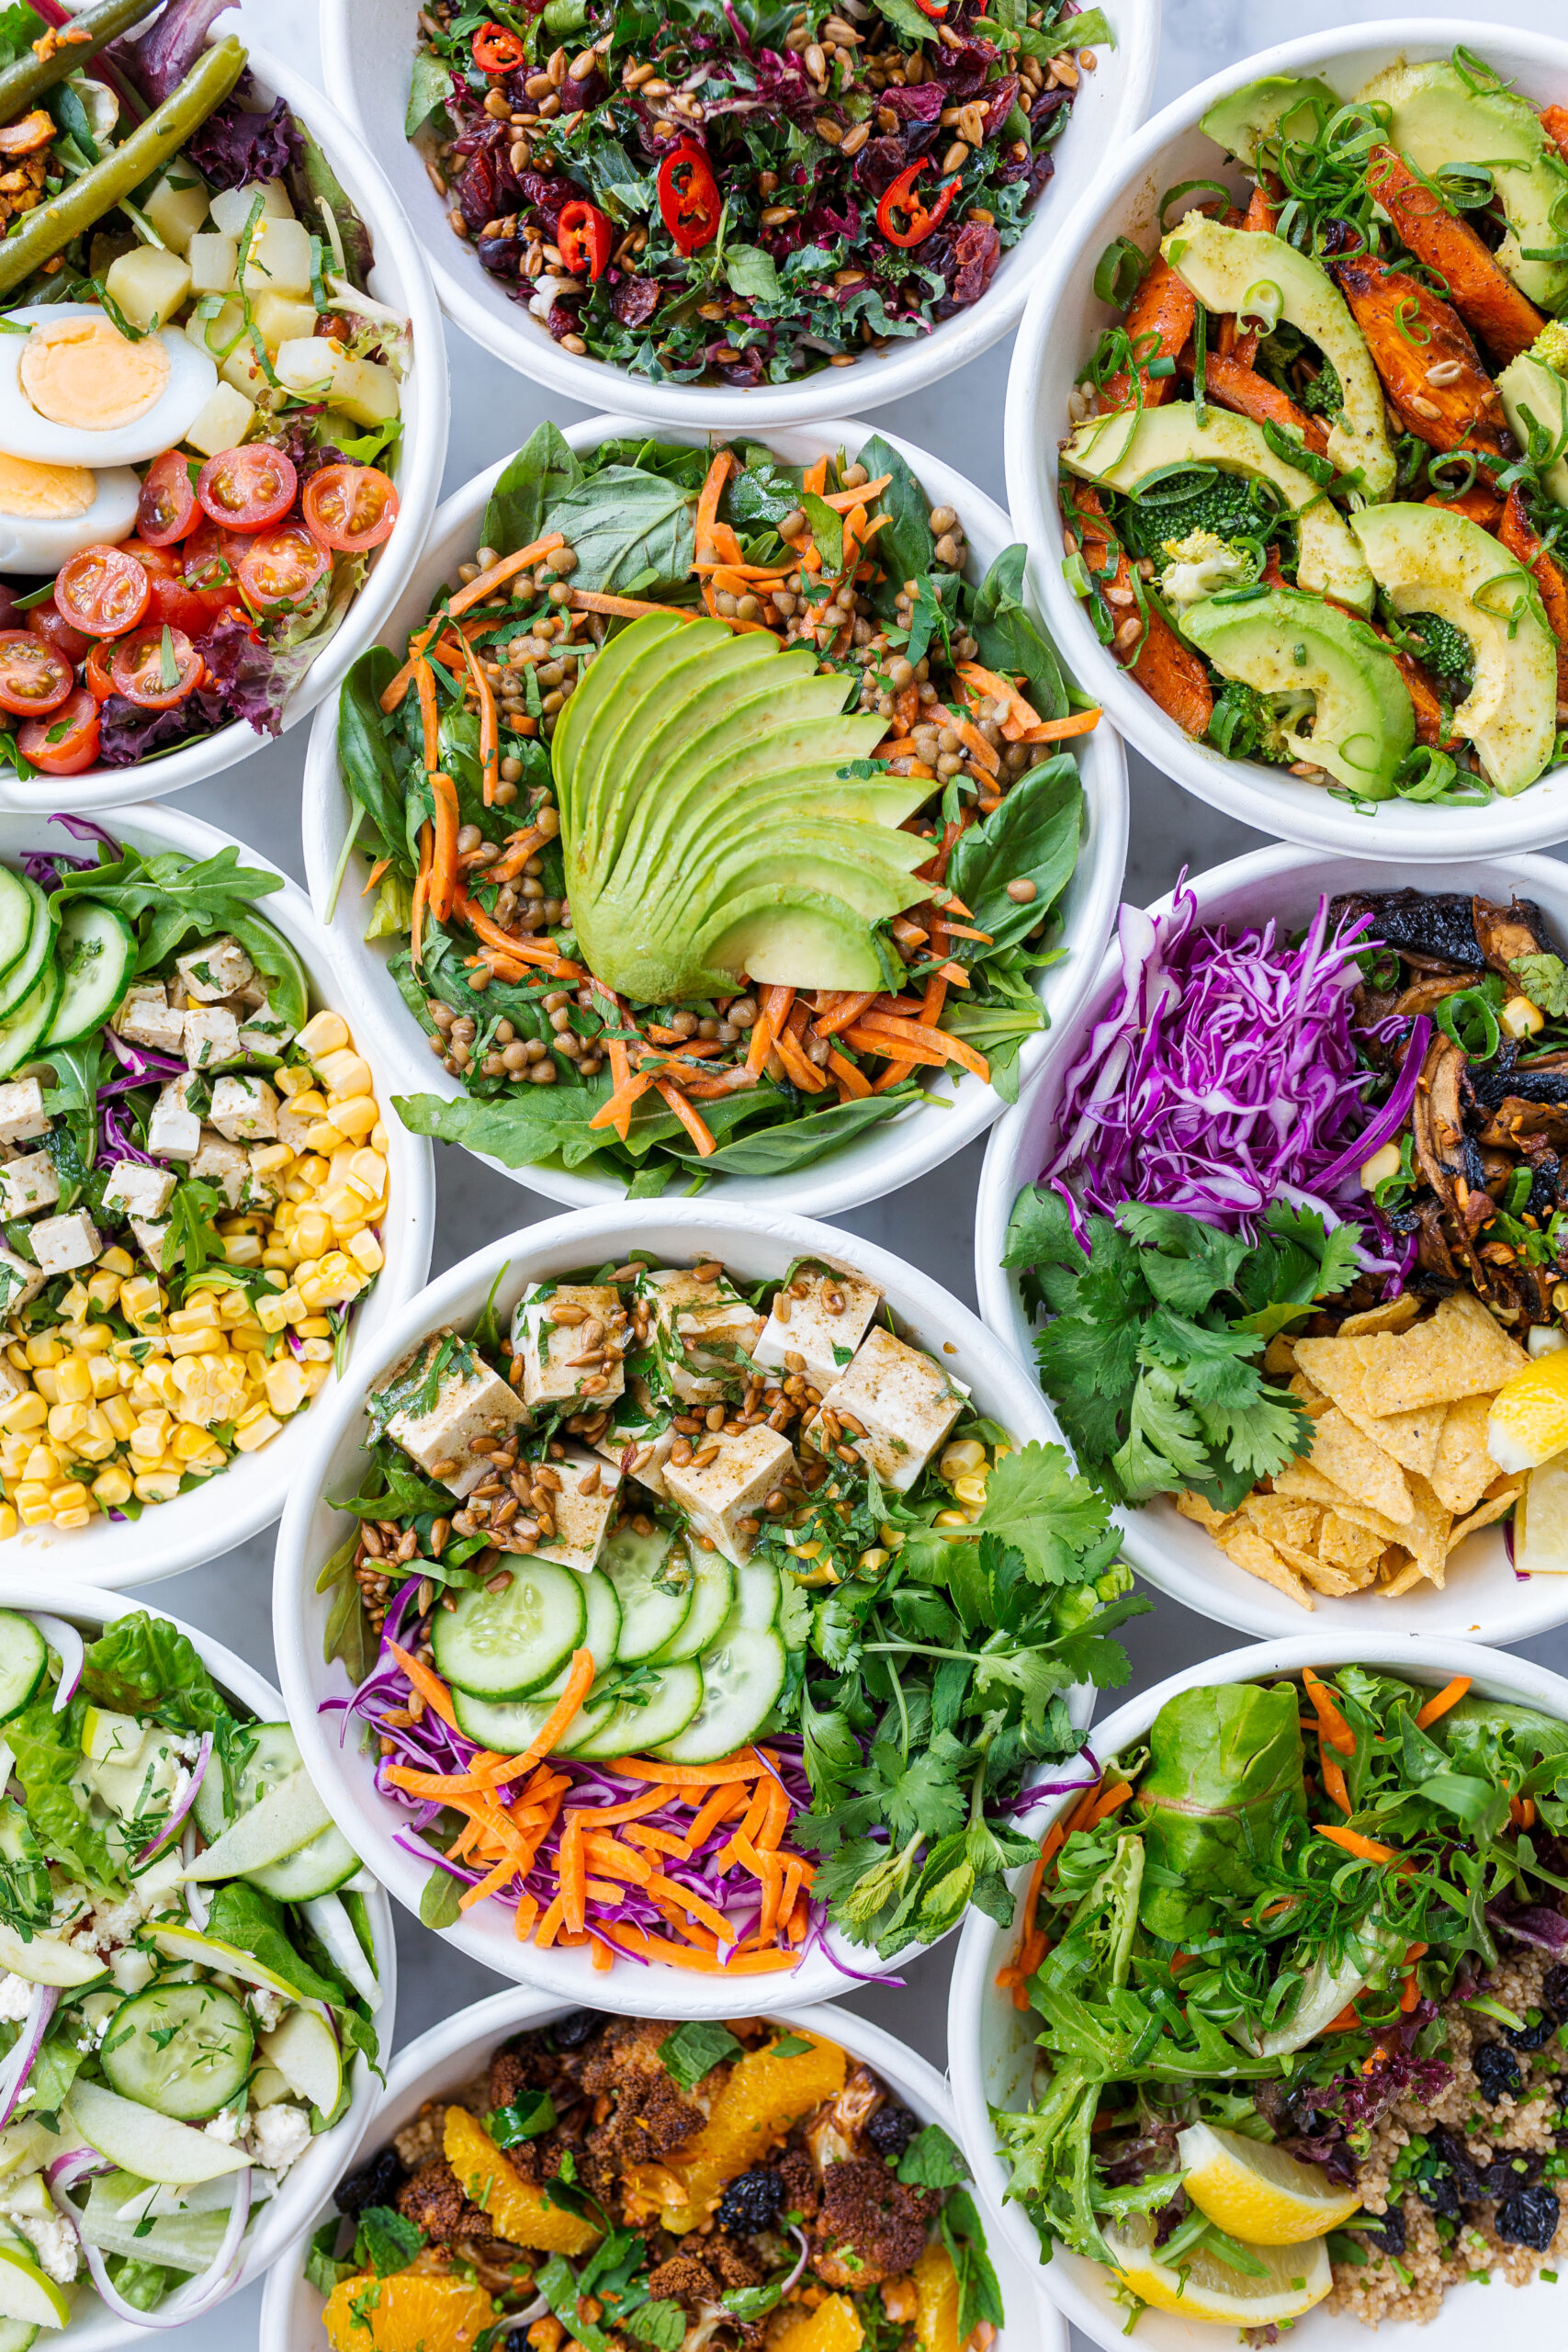 Ten bowls of mixed salads filled with greens, vegetables, grains, and more are shown. This article covers creating new dishes from old leftovers.